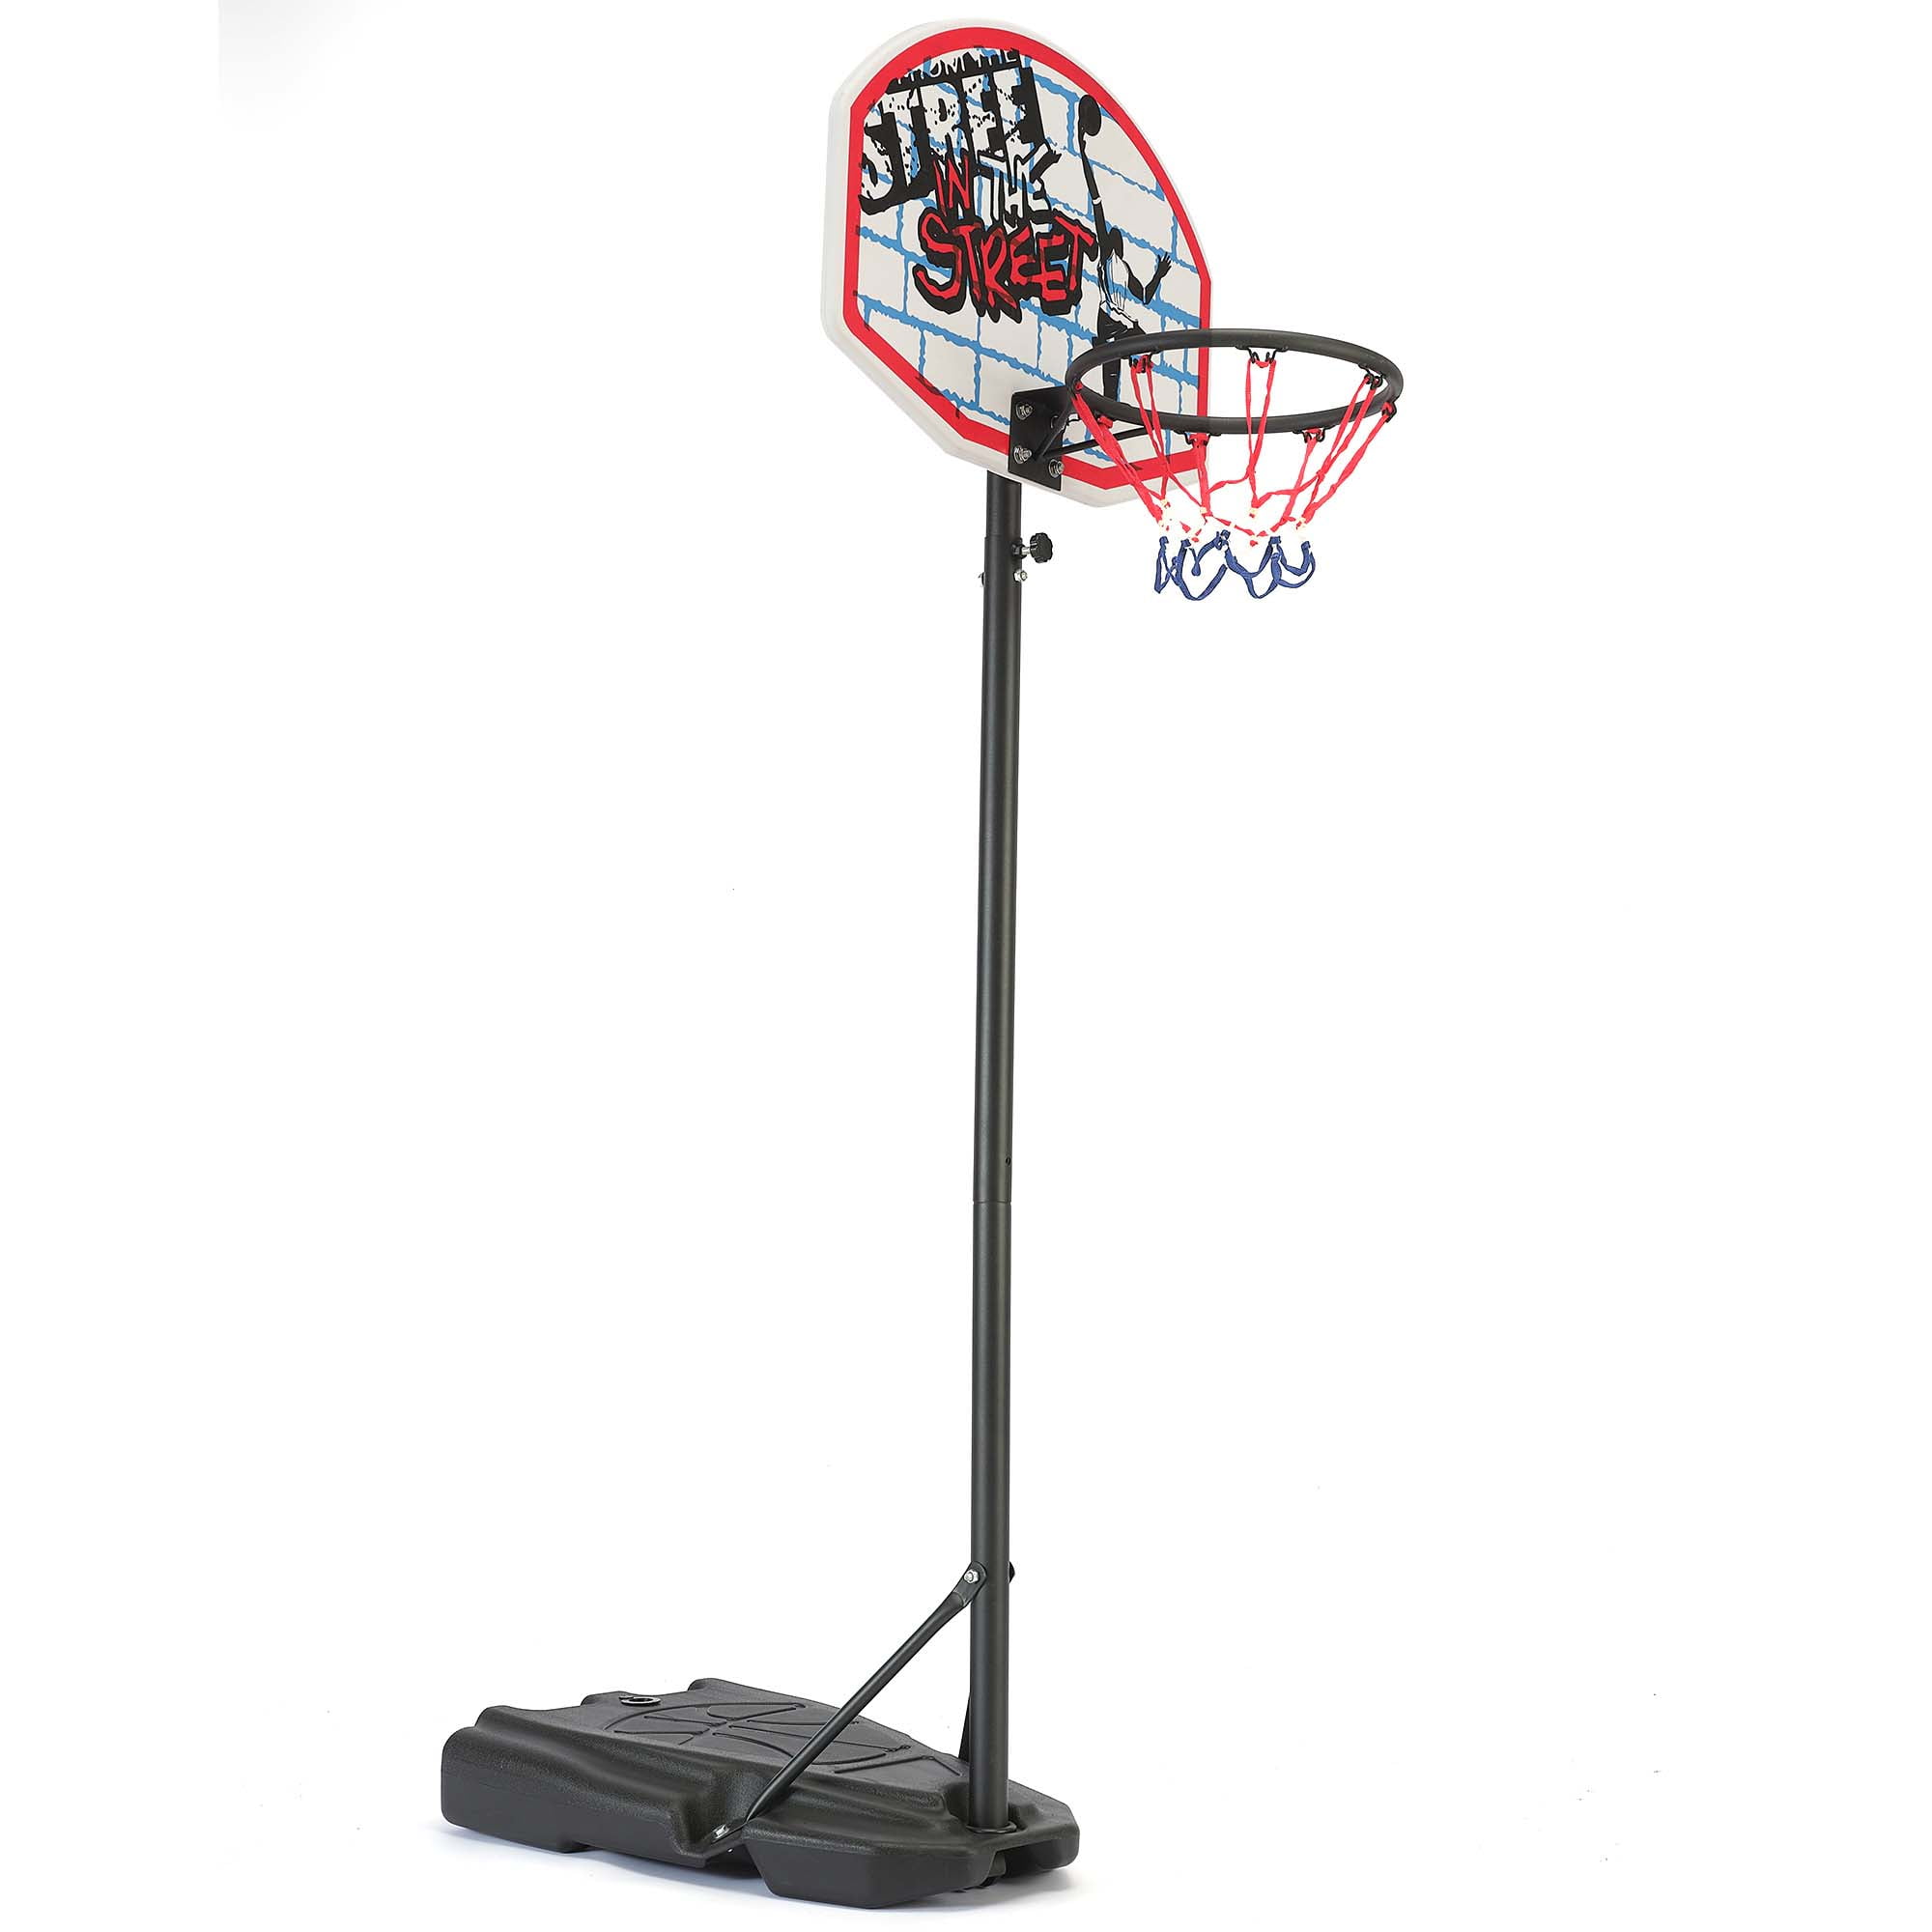 Indoor and Outdoor Fit Most Size Backboards Heavy Duty Basketball Rim Breakaway Single Spring Rim Replacement 17.7inches 